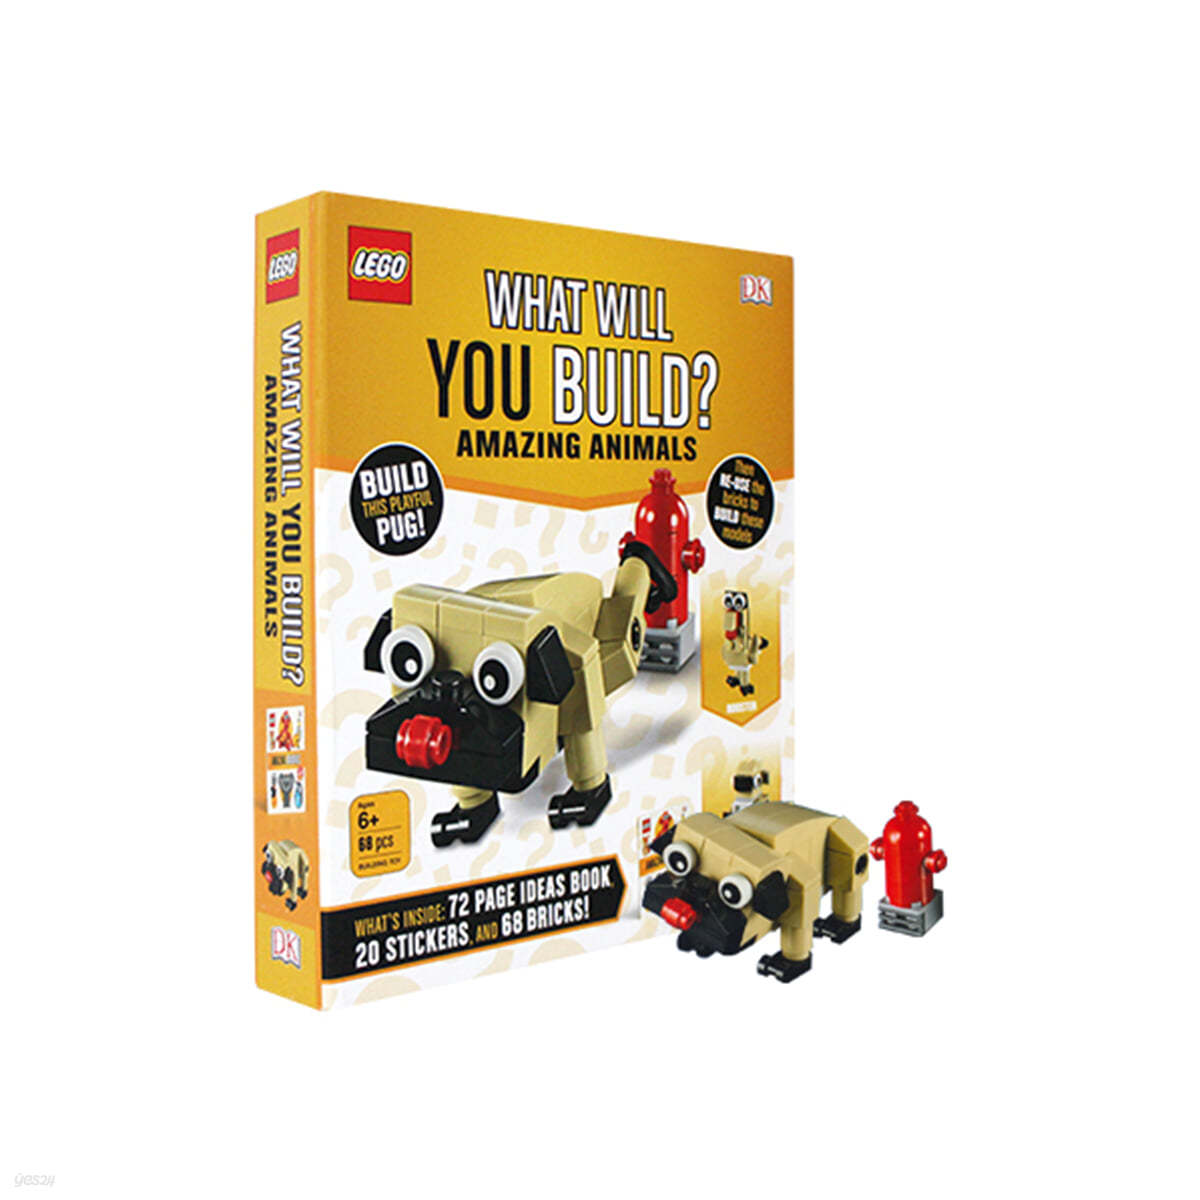 DK Lego What Will You Build? Amazing Animals - 레고북